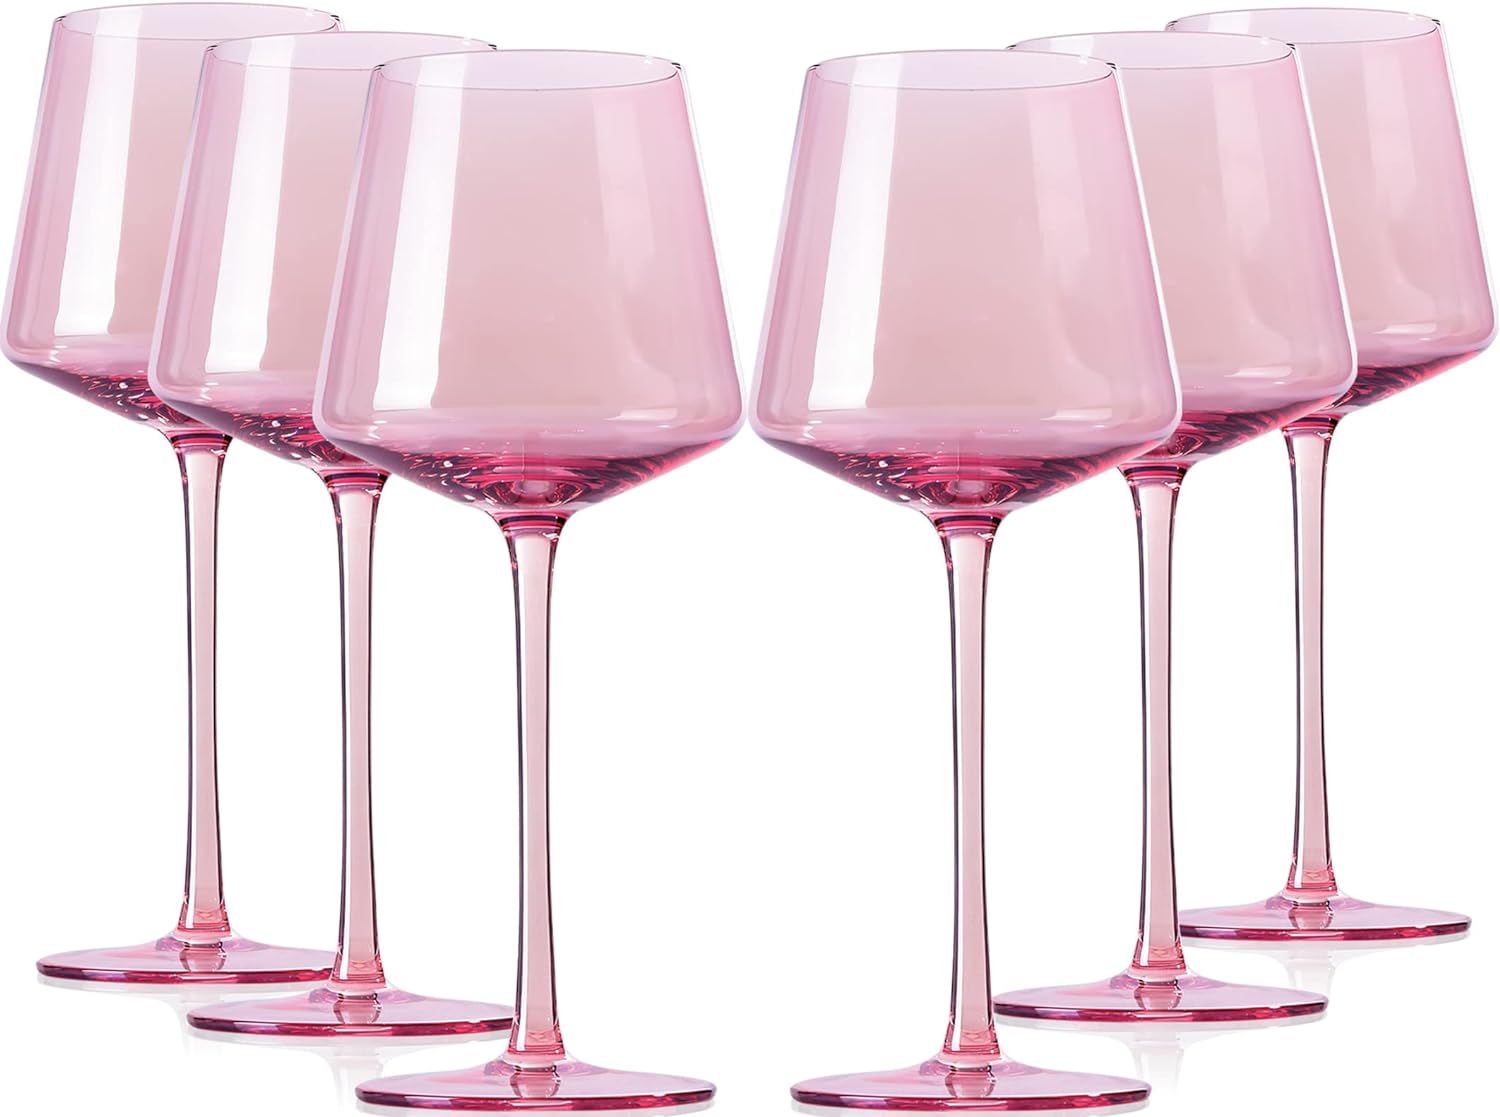 comfit Pink Wine Glasses Set Of 6 - Crystal Colorful Wine Glasses With Long Stem and Thin Rim,Mod... | Amazon (US)